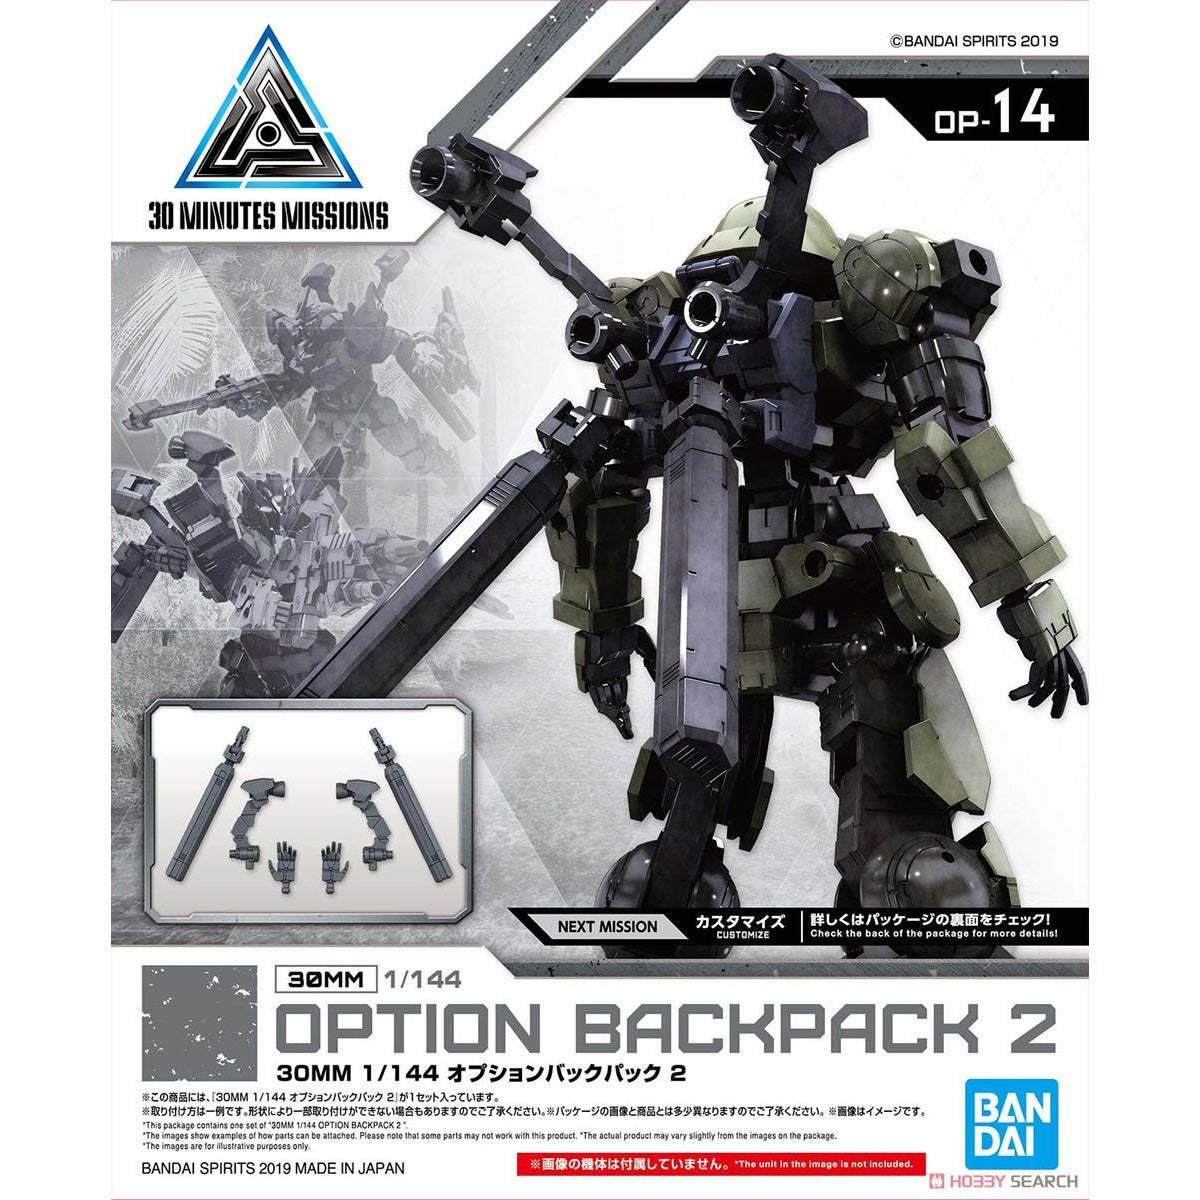 Option Backpack 2 1/144 30 Minutes Missions Accessory Model Kit #5058192 by Bandai